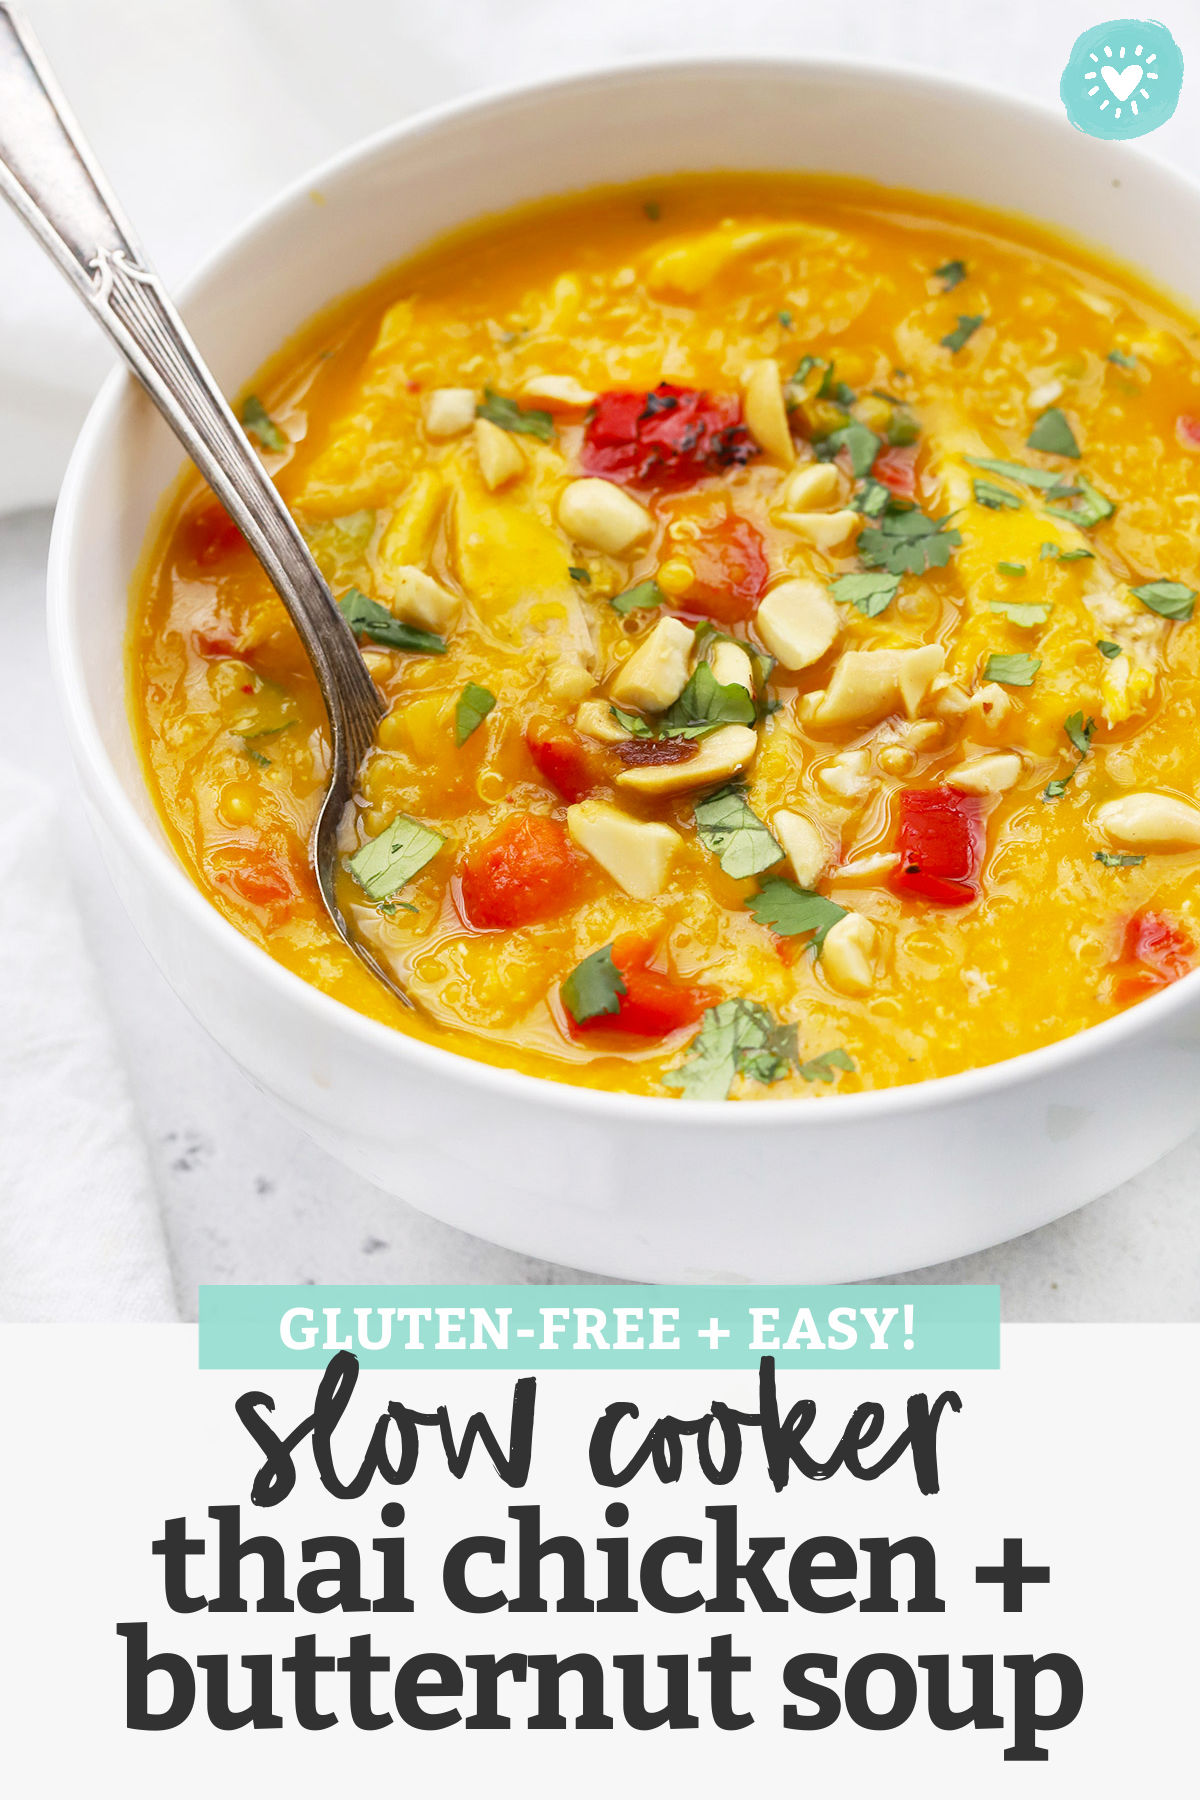 Slow Cooker Thai Chicken and Butternut Squash Soup - This curry squash soup has tender chicken, colorful veggies, and a velvety texture you'll dream about! (Gluten-Free, Dairy-Free) // Thai Curry Squash Quinoa Soup // Squash Chicken Soup #slowcooker #soup #squash #chicken #cleaneating #healthydinner #healthylunch